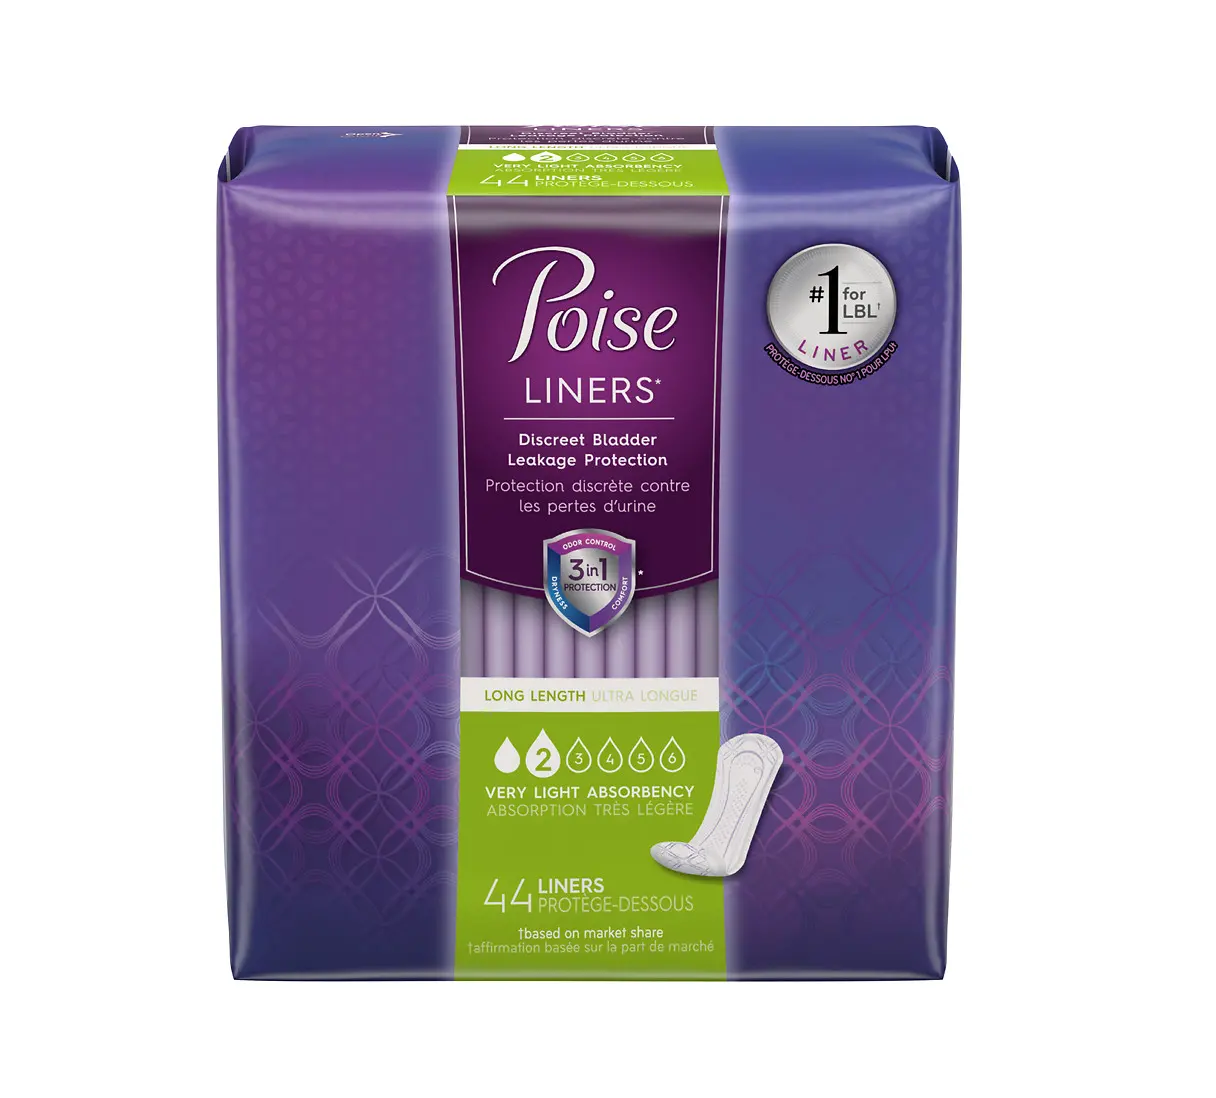 Poise Liners Long Length Very Light 44 Liners